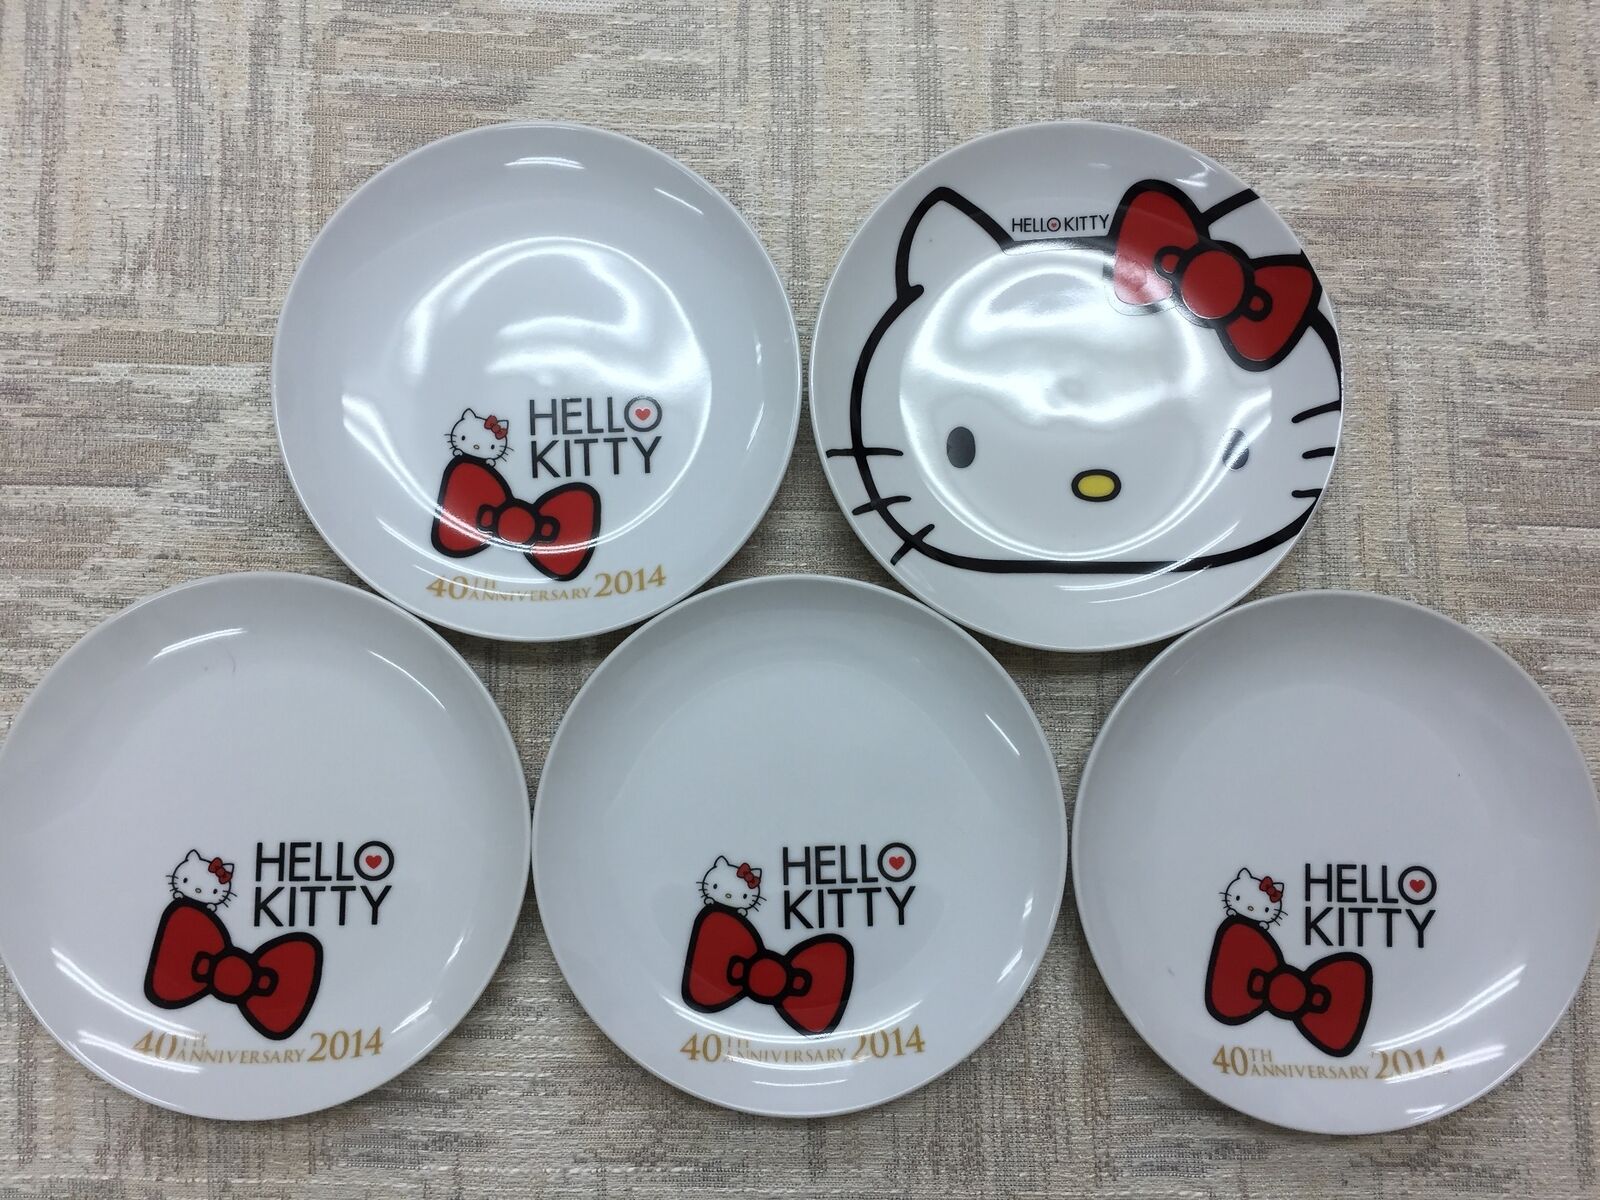 Not for sale) 40th limited edition Hello Kitty plate set Lawson collaboration